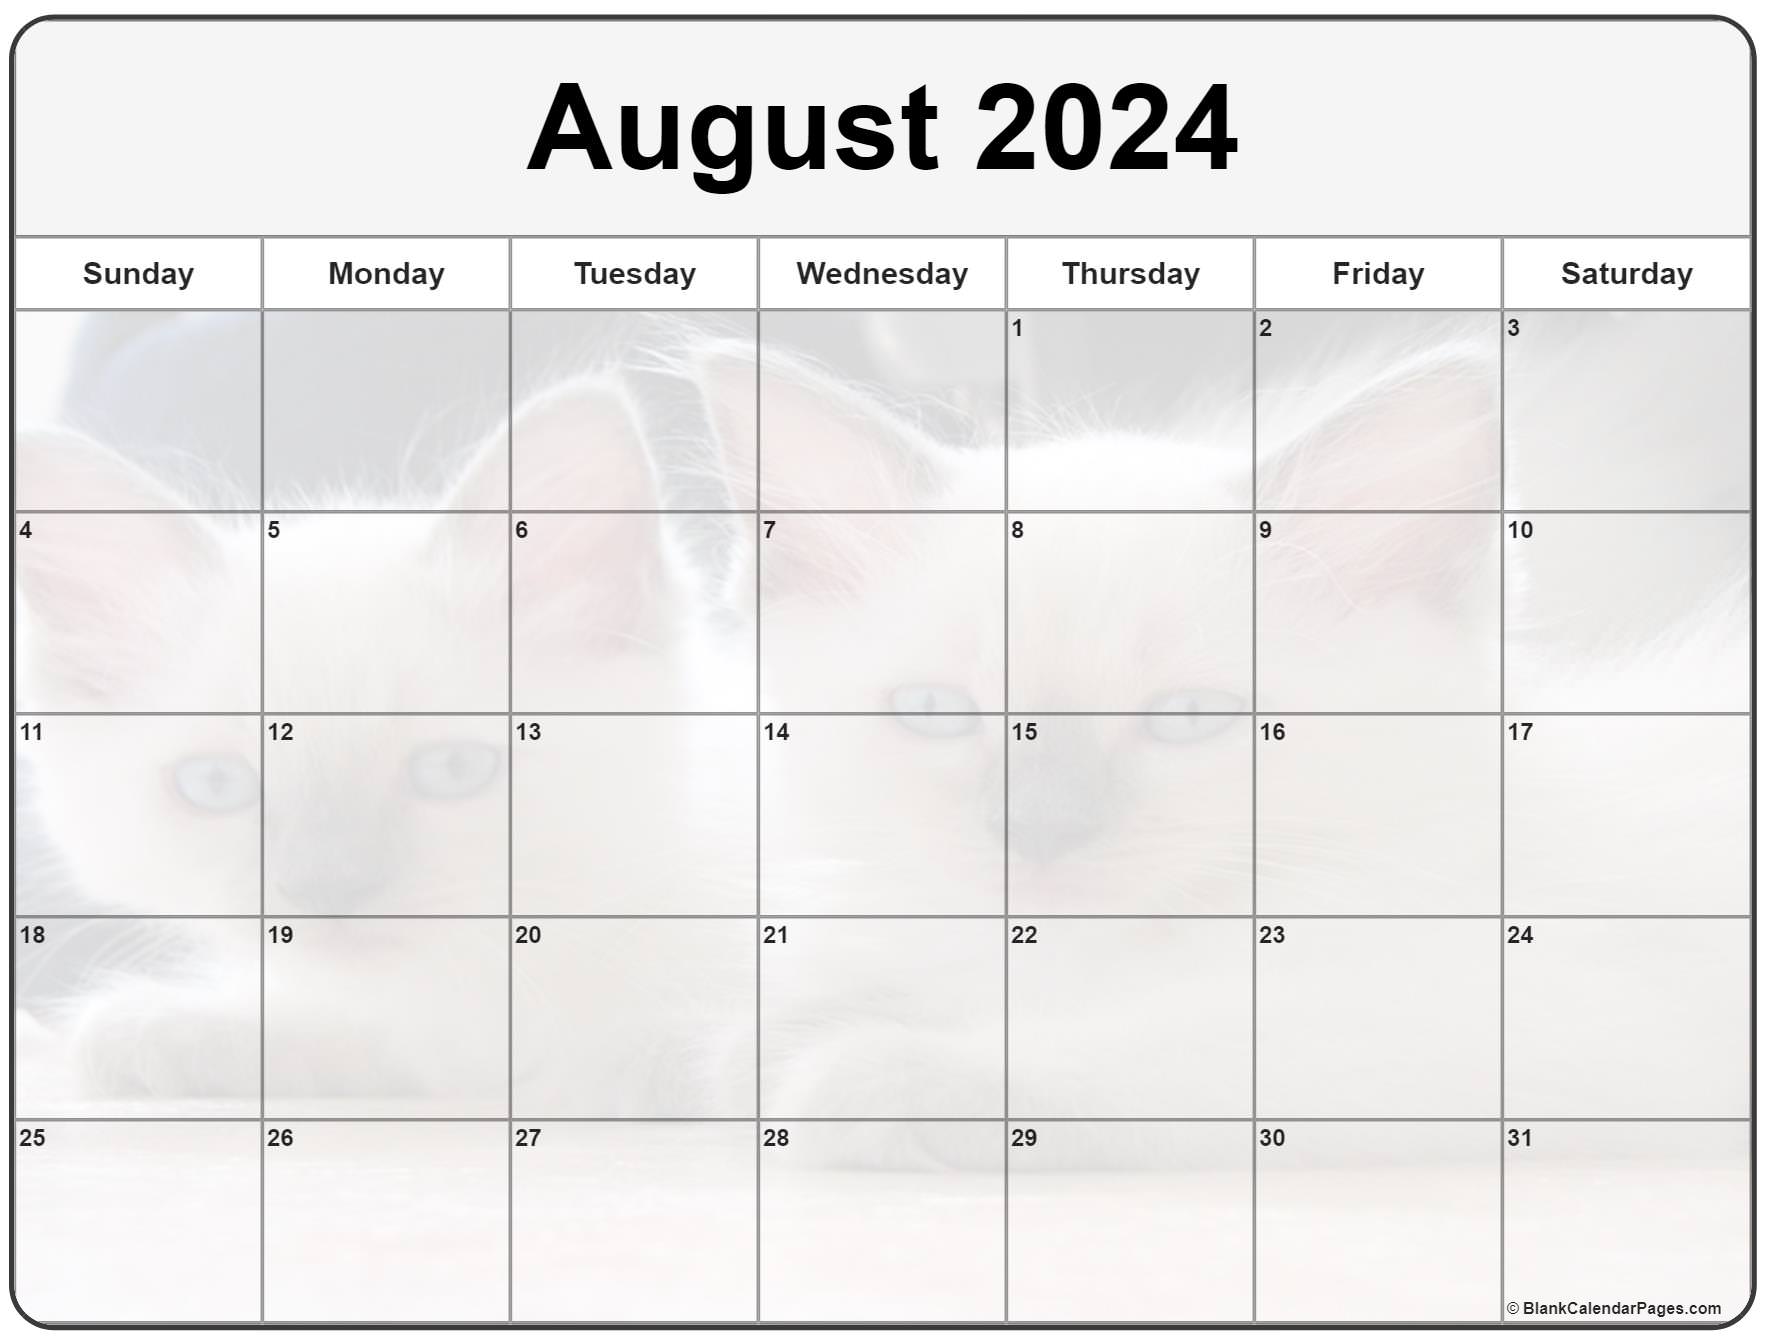 Collection of August 2022 photo calendars with image filters.